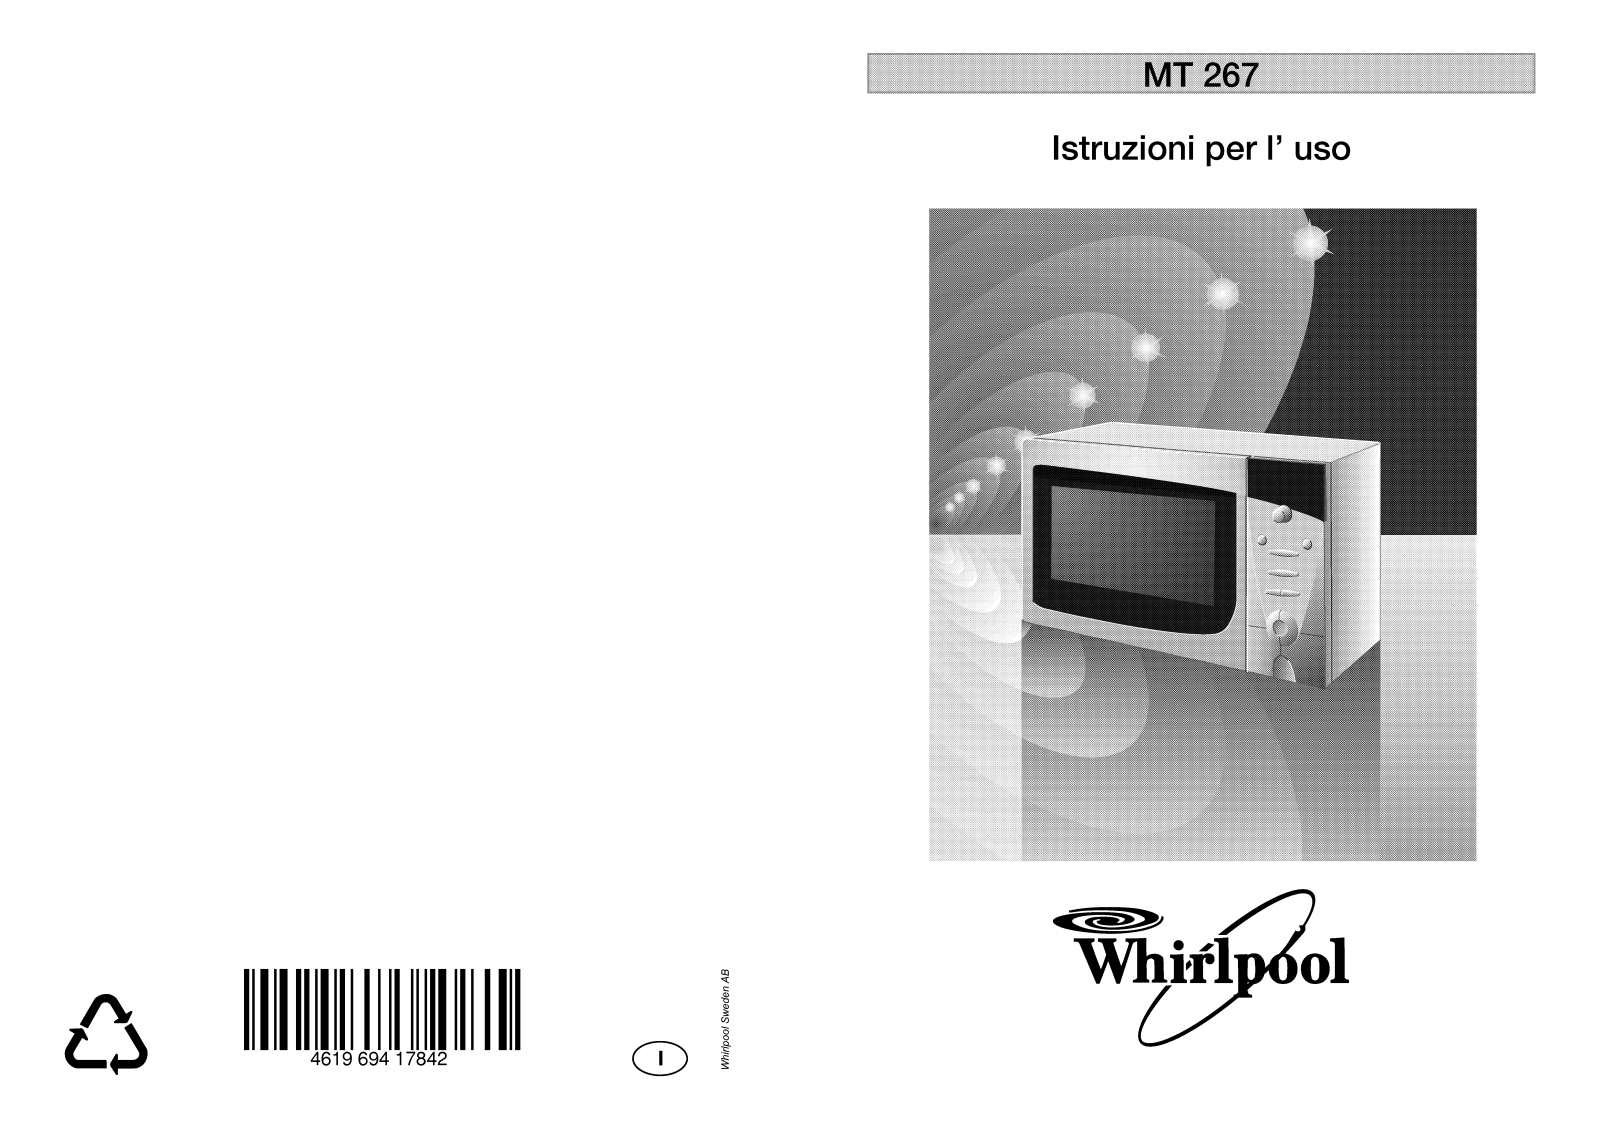 Whirlpool MT 265 WH WP, MT 267/WH, MT 267/BL, MT 267/WH/WEISS, MT 267/NOIR INSTRUCTION FOR USE